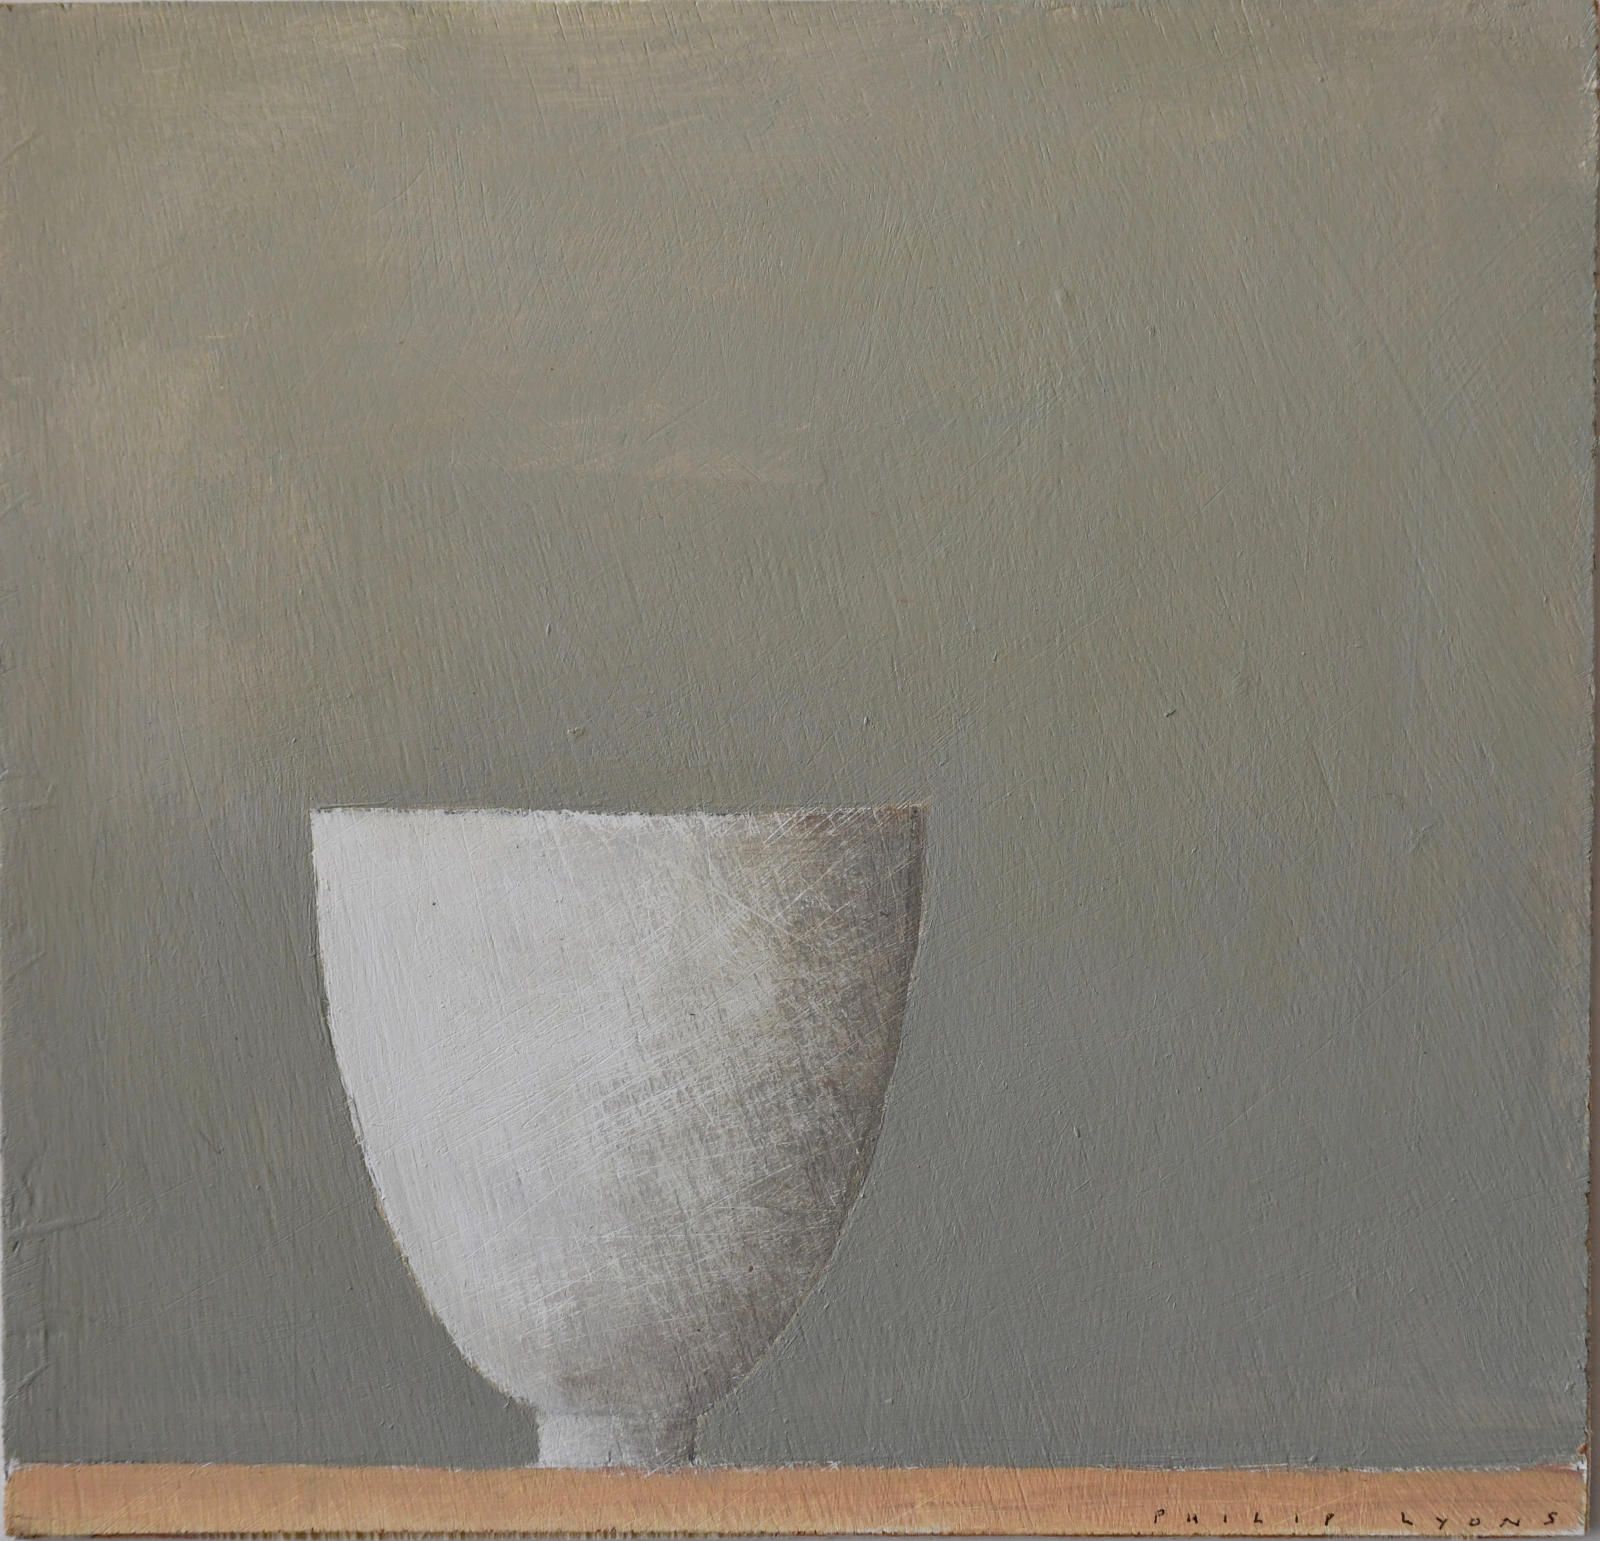 Silent Moment( Small White Bowl ) by Philip Lyons